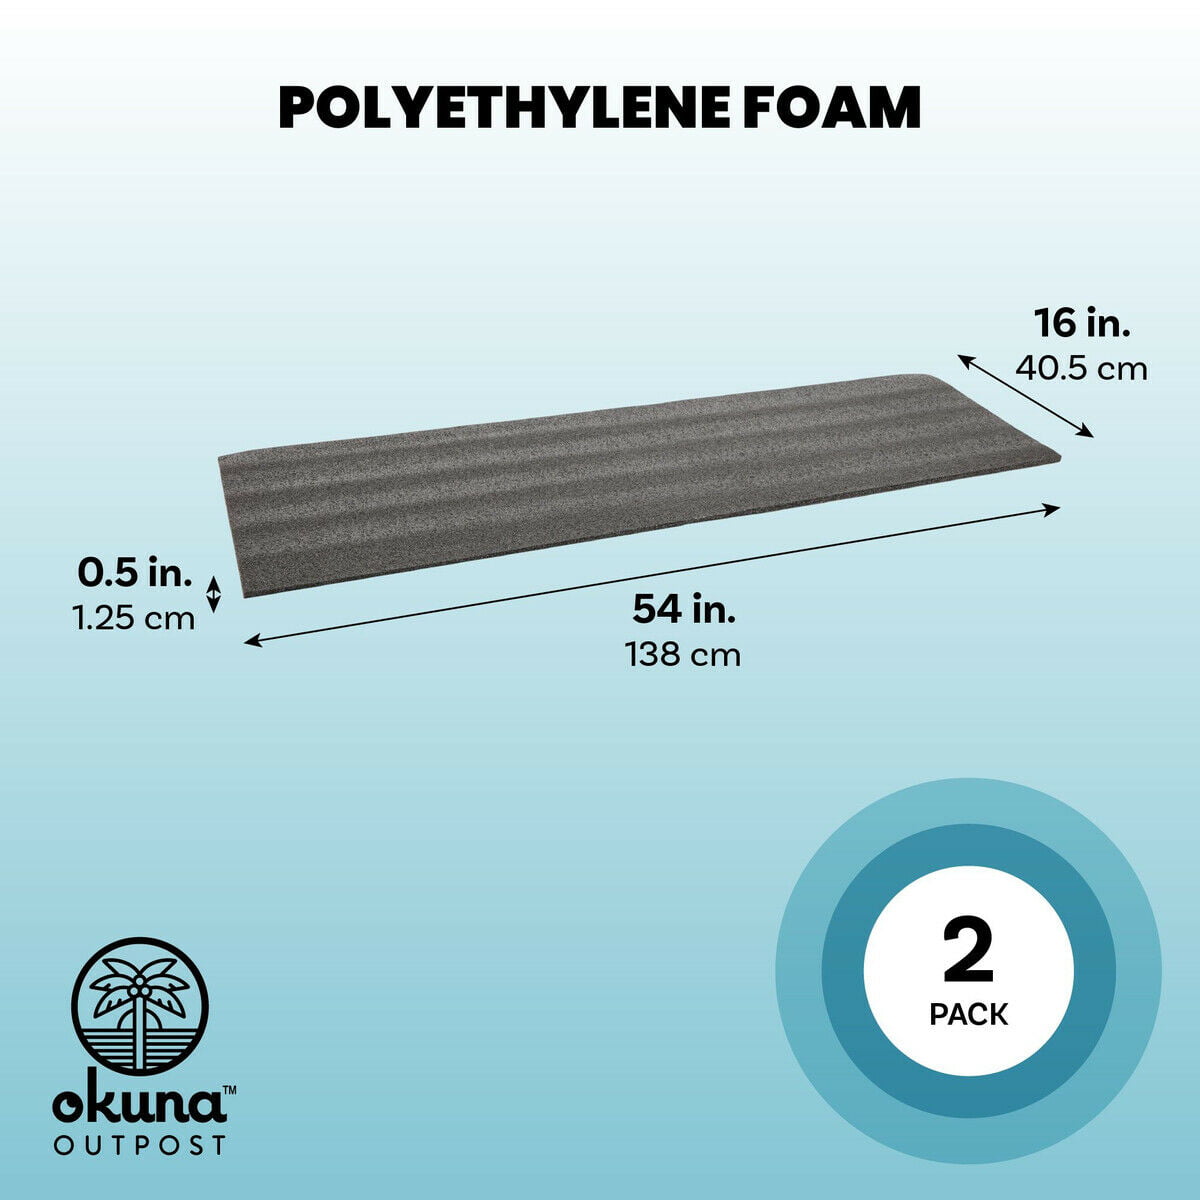 54x16 in, 2 Sheets Customizable Polyurethane Foam Inserts for Packing and Crafts 0.5 in 